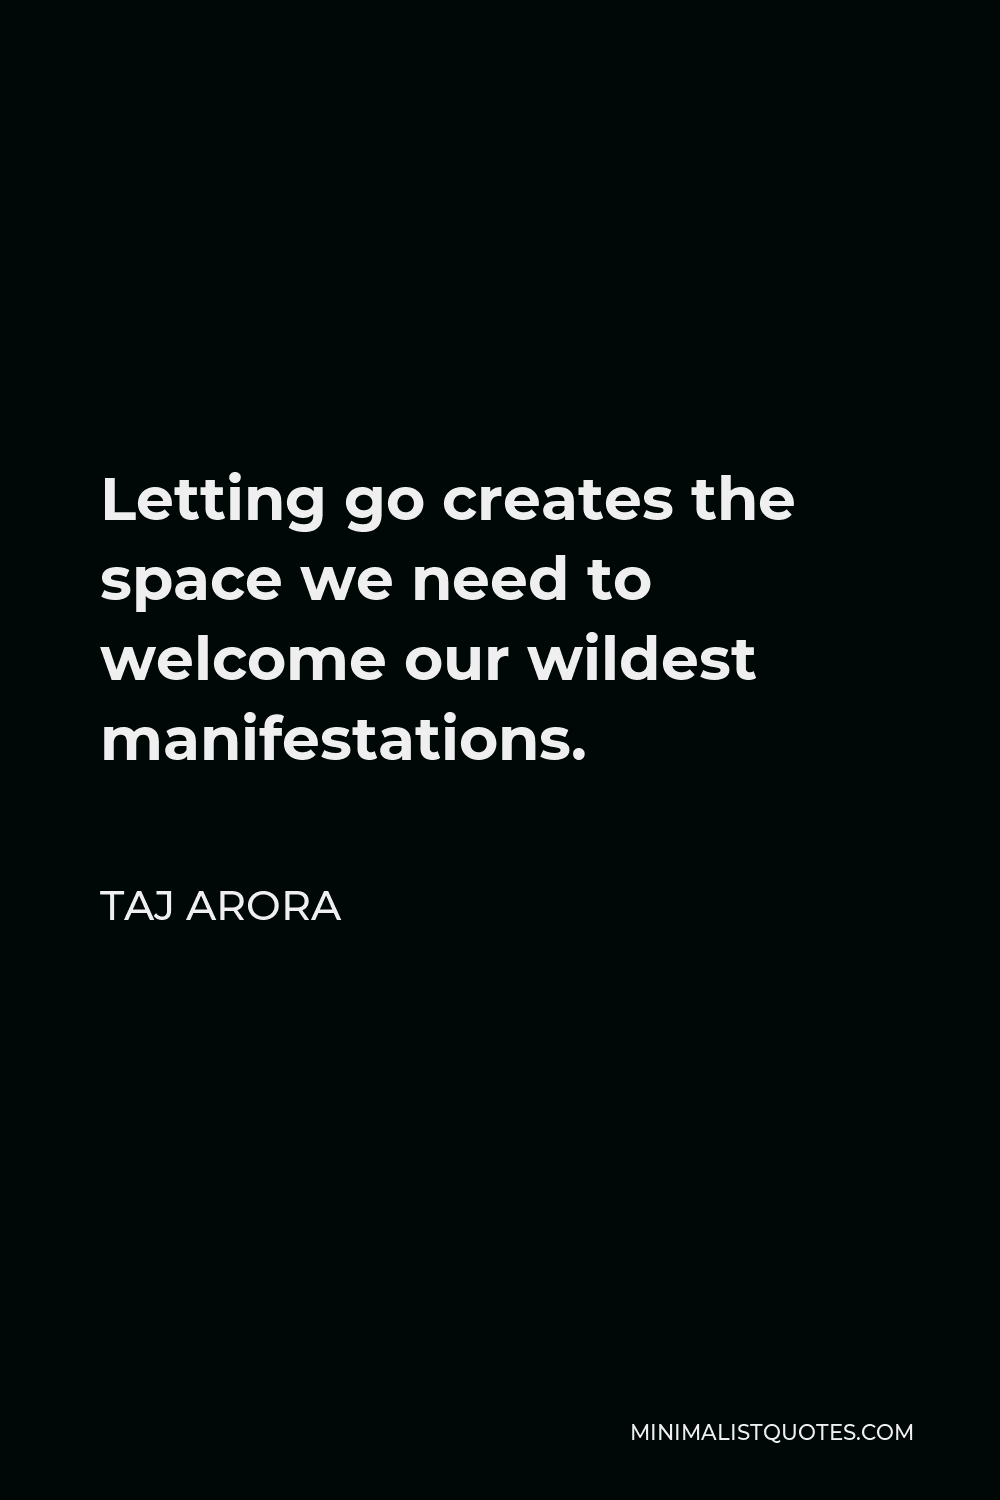 Taj Arora Quote - Letting go creates the space we need to welcome our wildest manifestations.